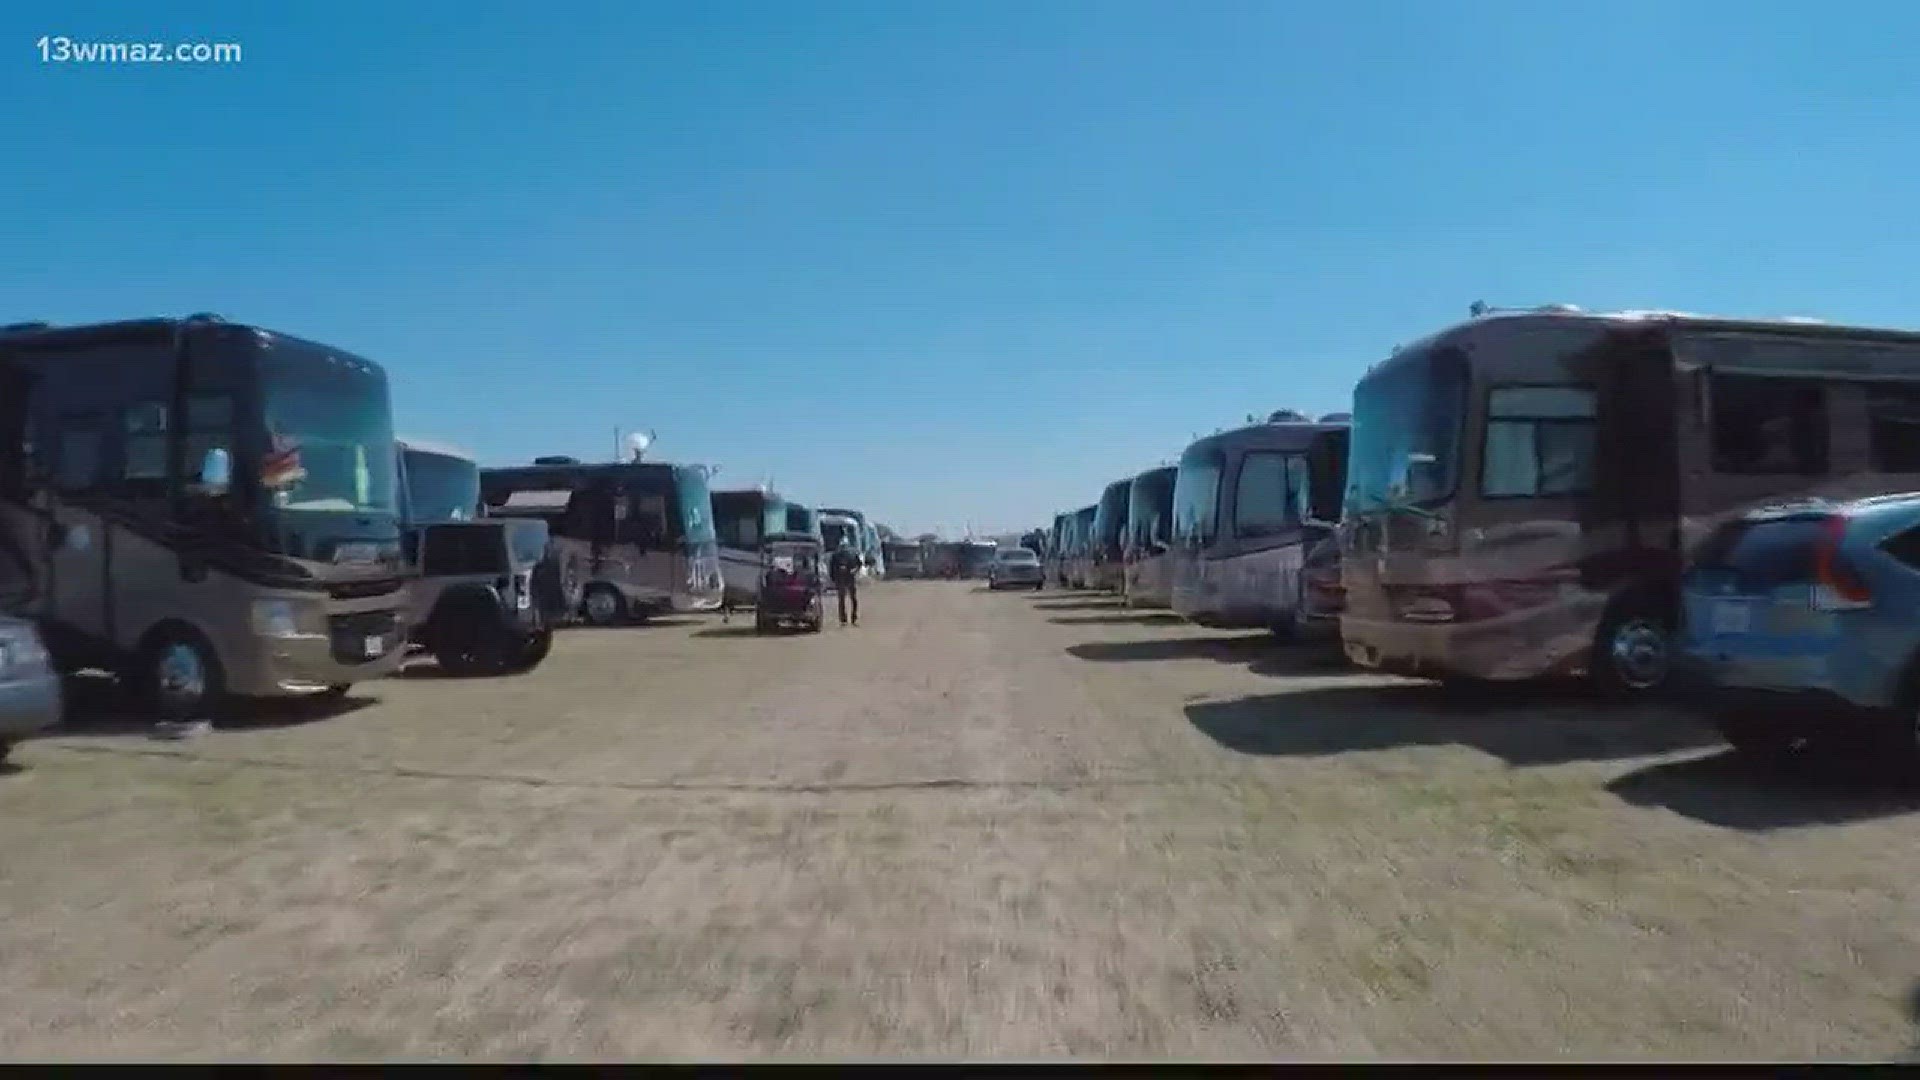 Thousands of RVs pack into the Georgia National Fairgrounds